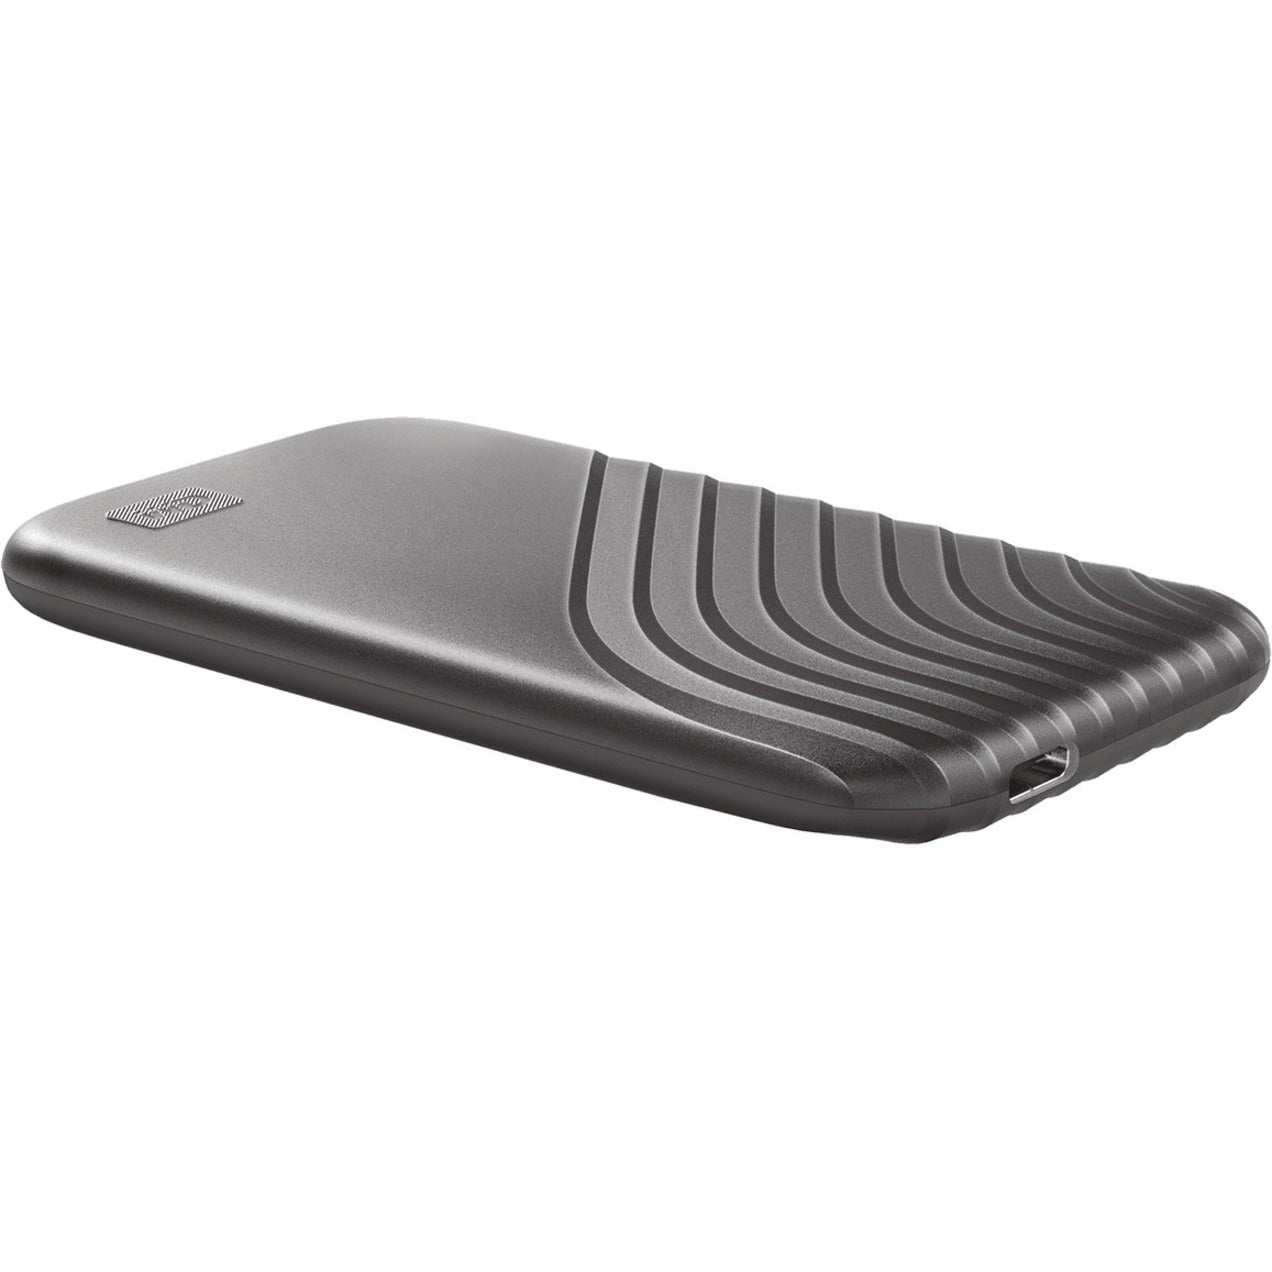 WD WDBAGF0010BGY-WESN My Passport Solid State Drive, 1 TB, Space Gray, USB 3.2 (Gen 2) Type C